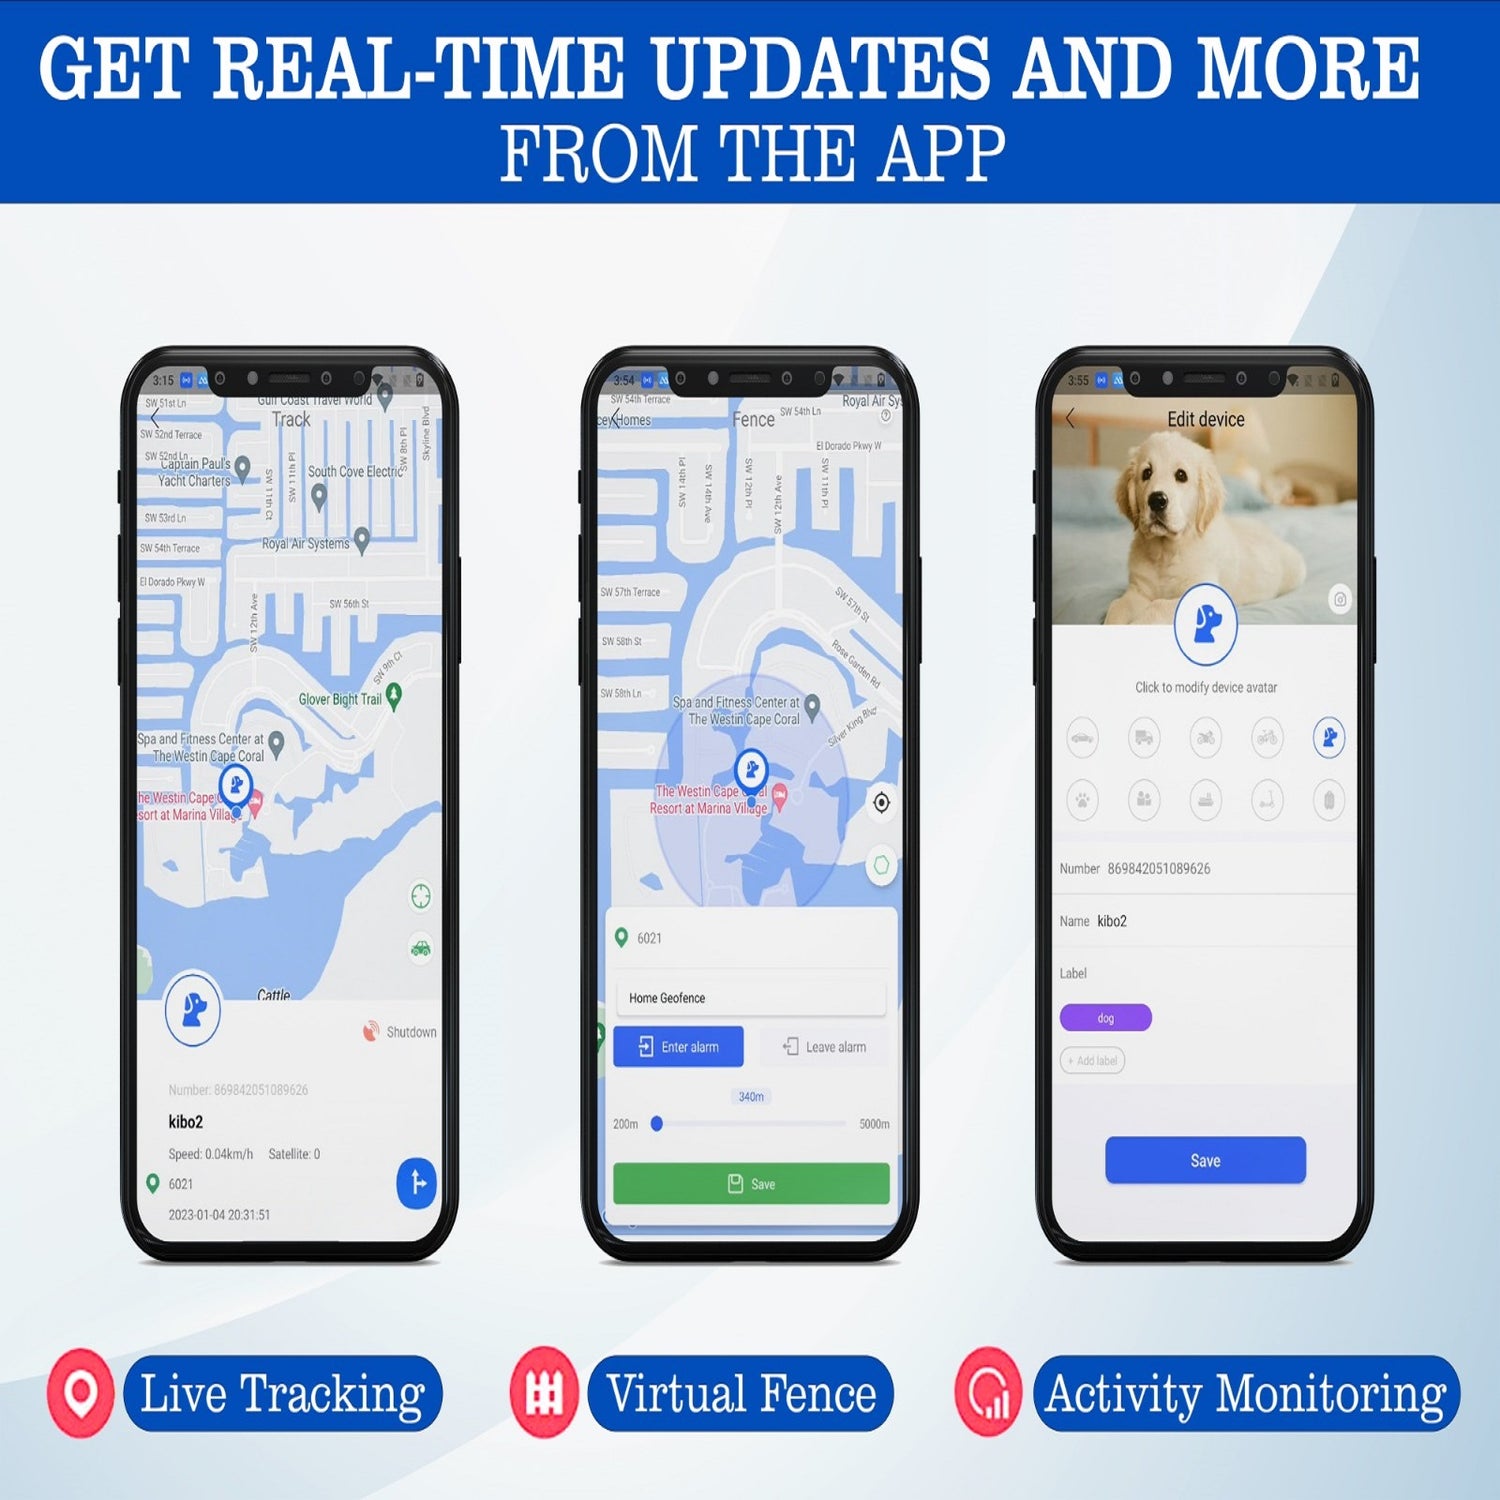 App interface displaying real-time pet location updates